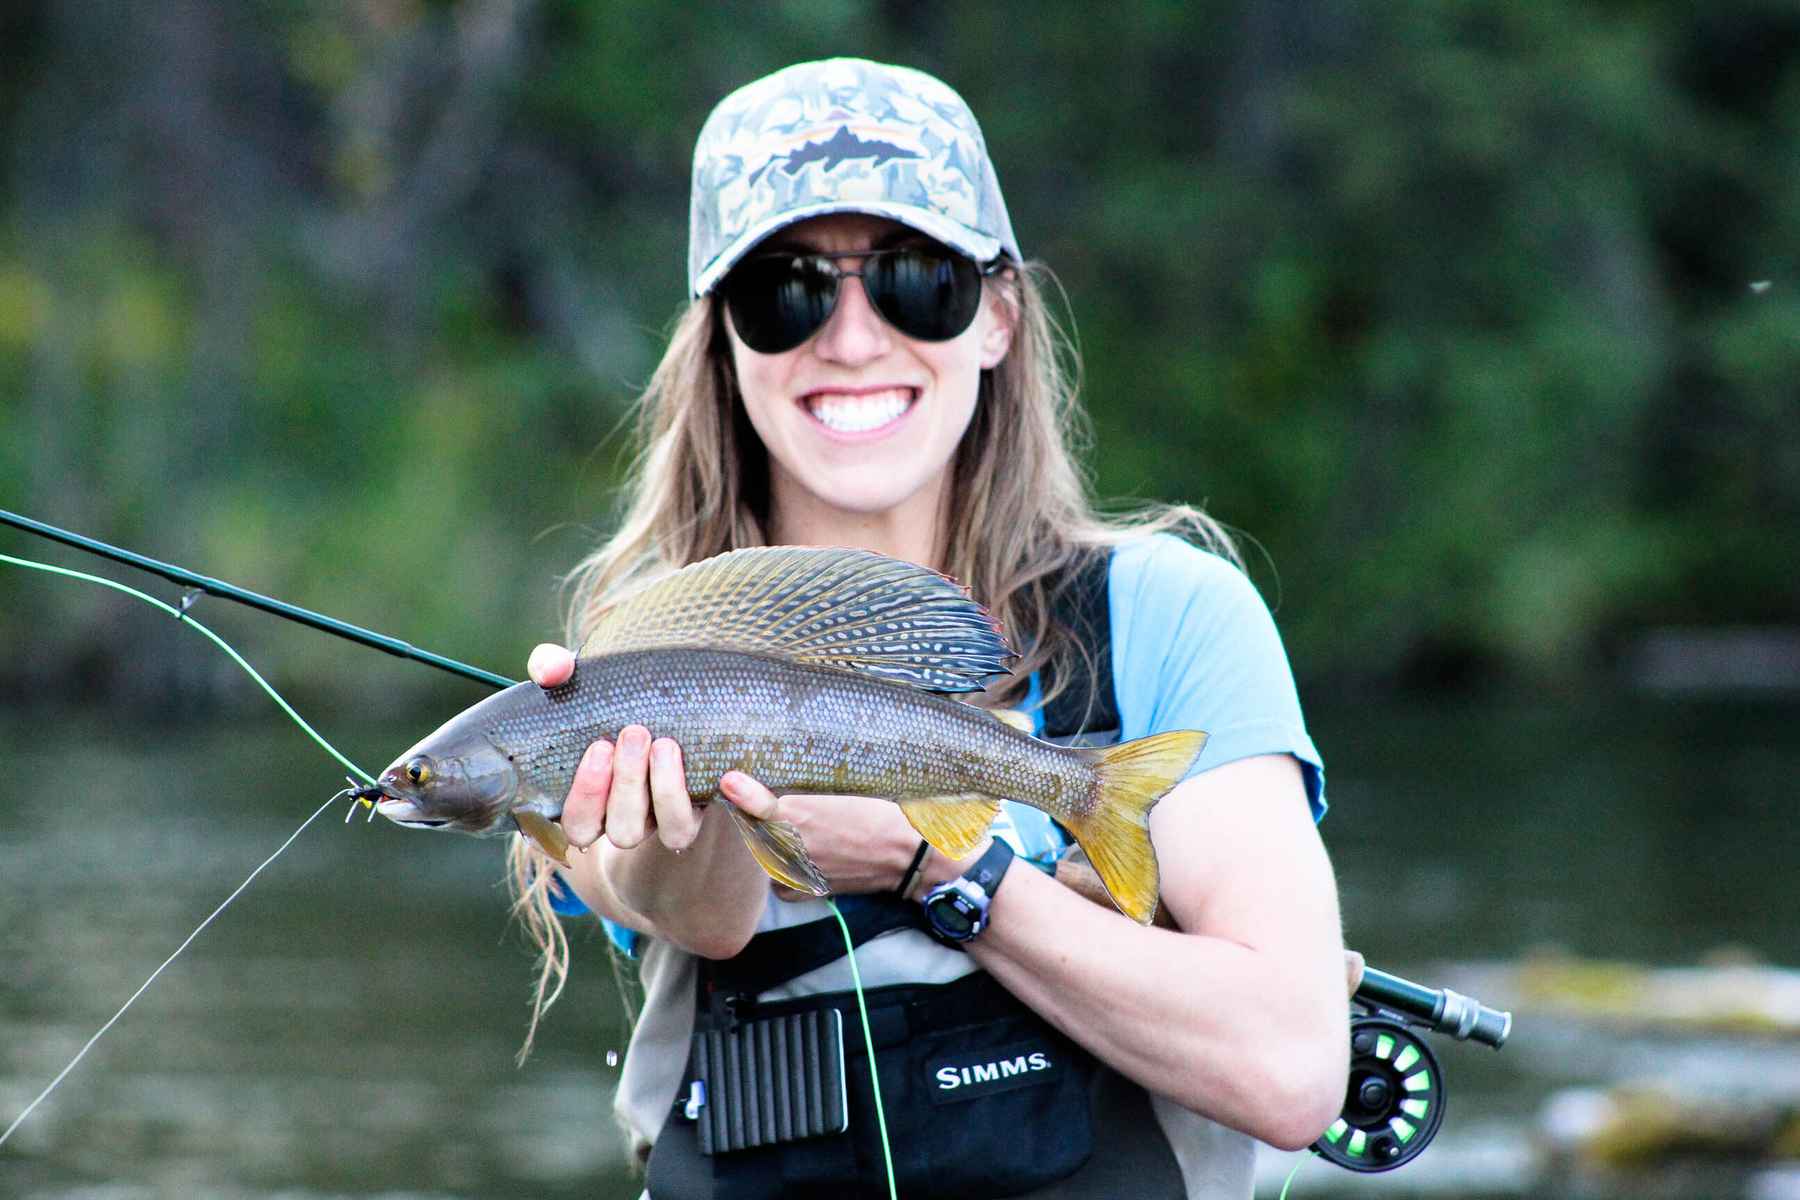 http://www.hatchmag.com/sites/default/files/styles/extra-large/public/field/image/image_219.jpg